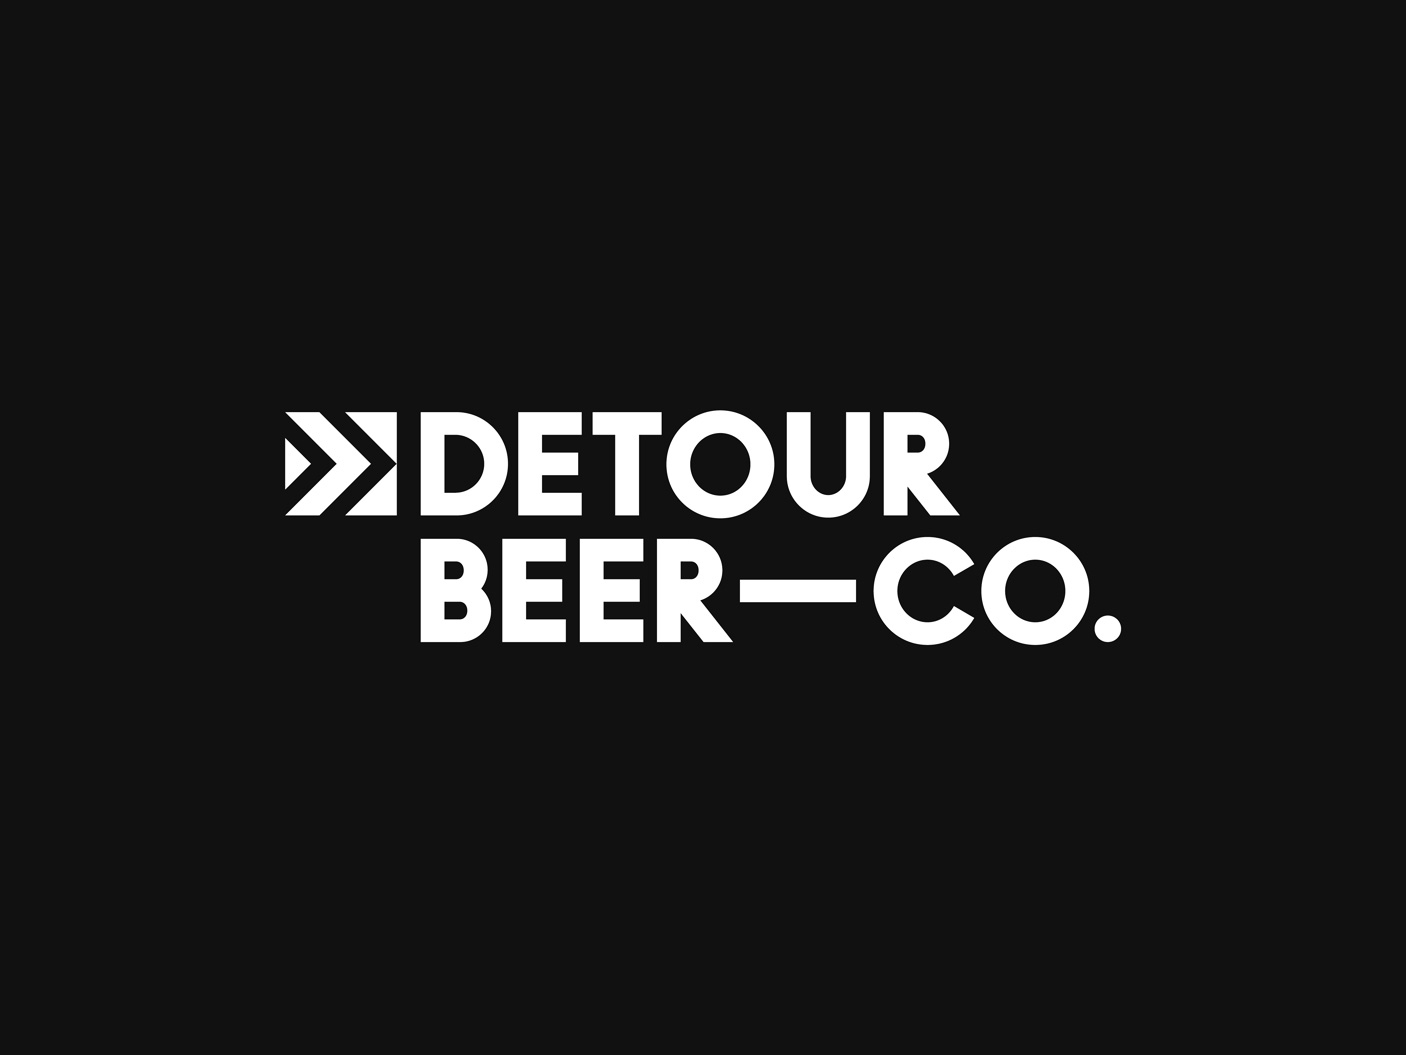 Logotype design by Weave for Australian craft beer business Detour Beer Co. Reviewed on by Richard Baird